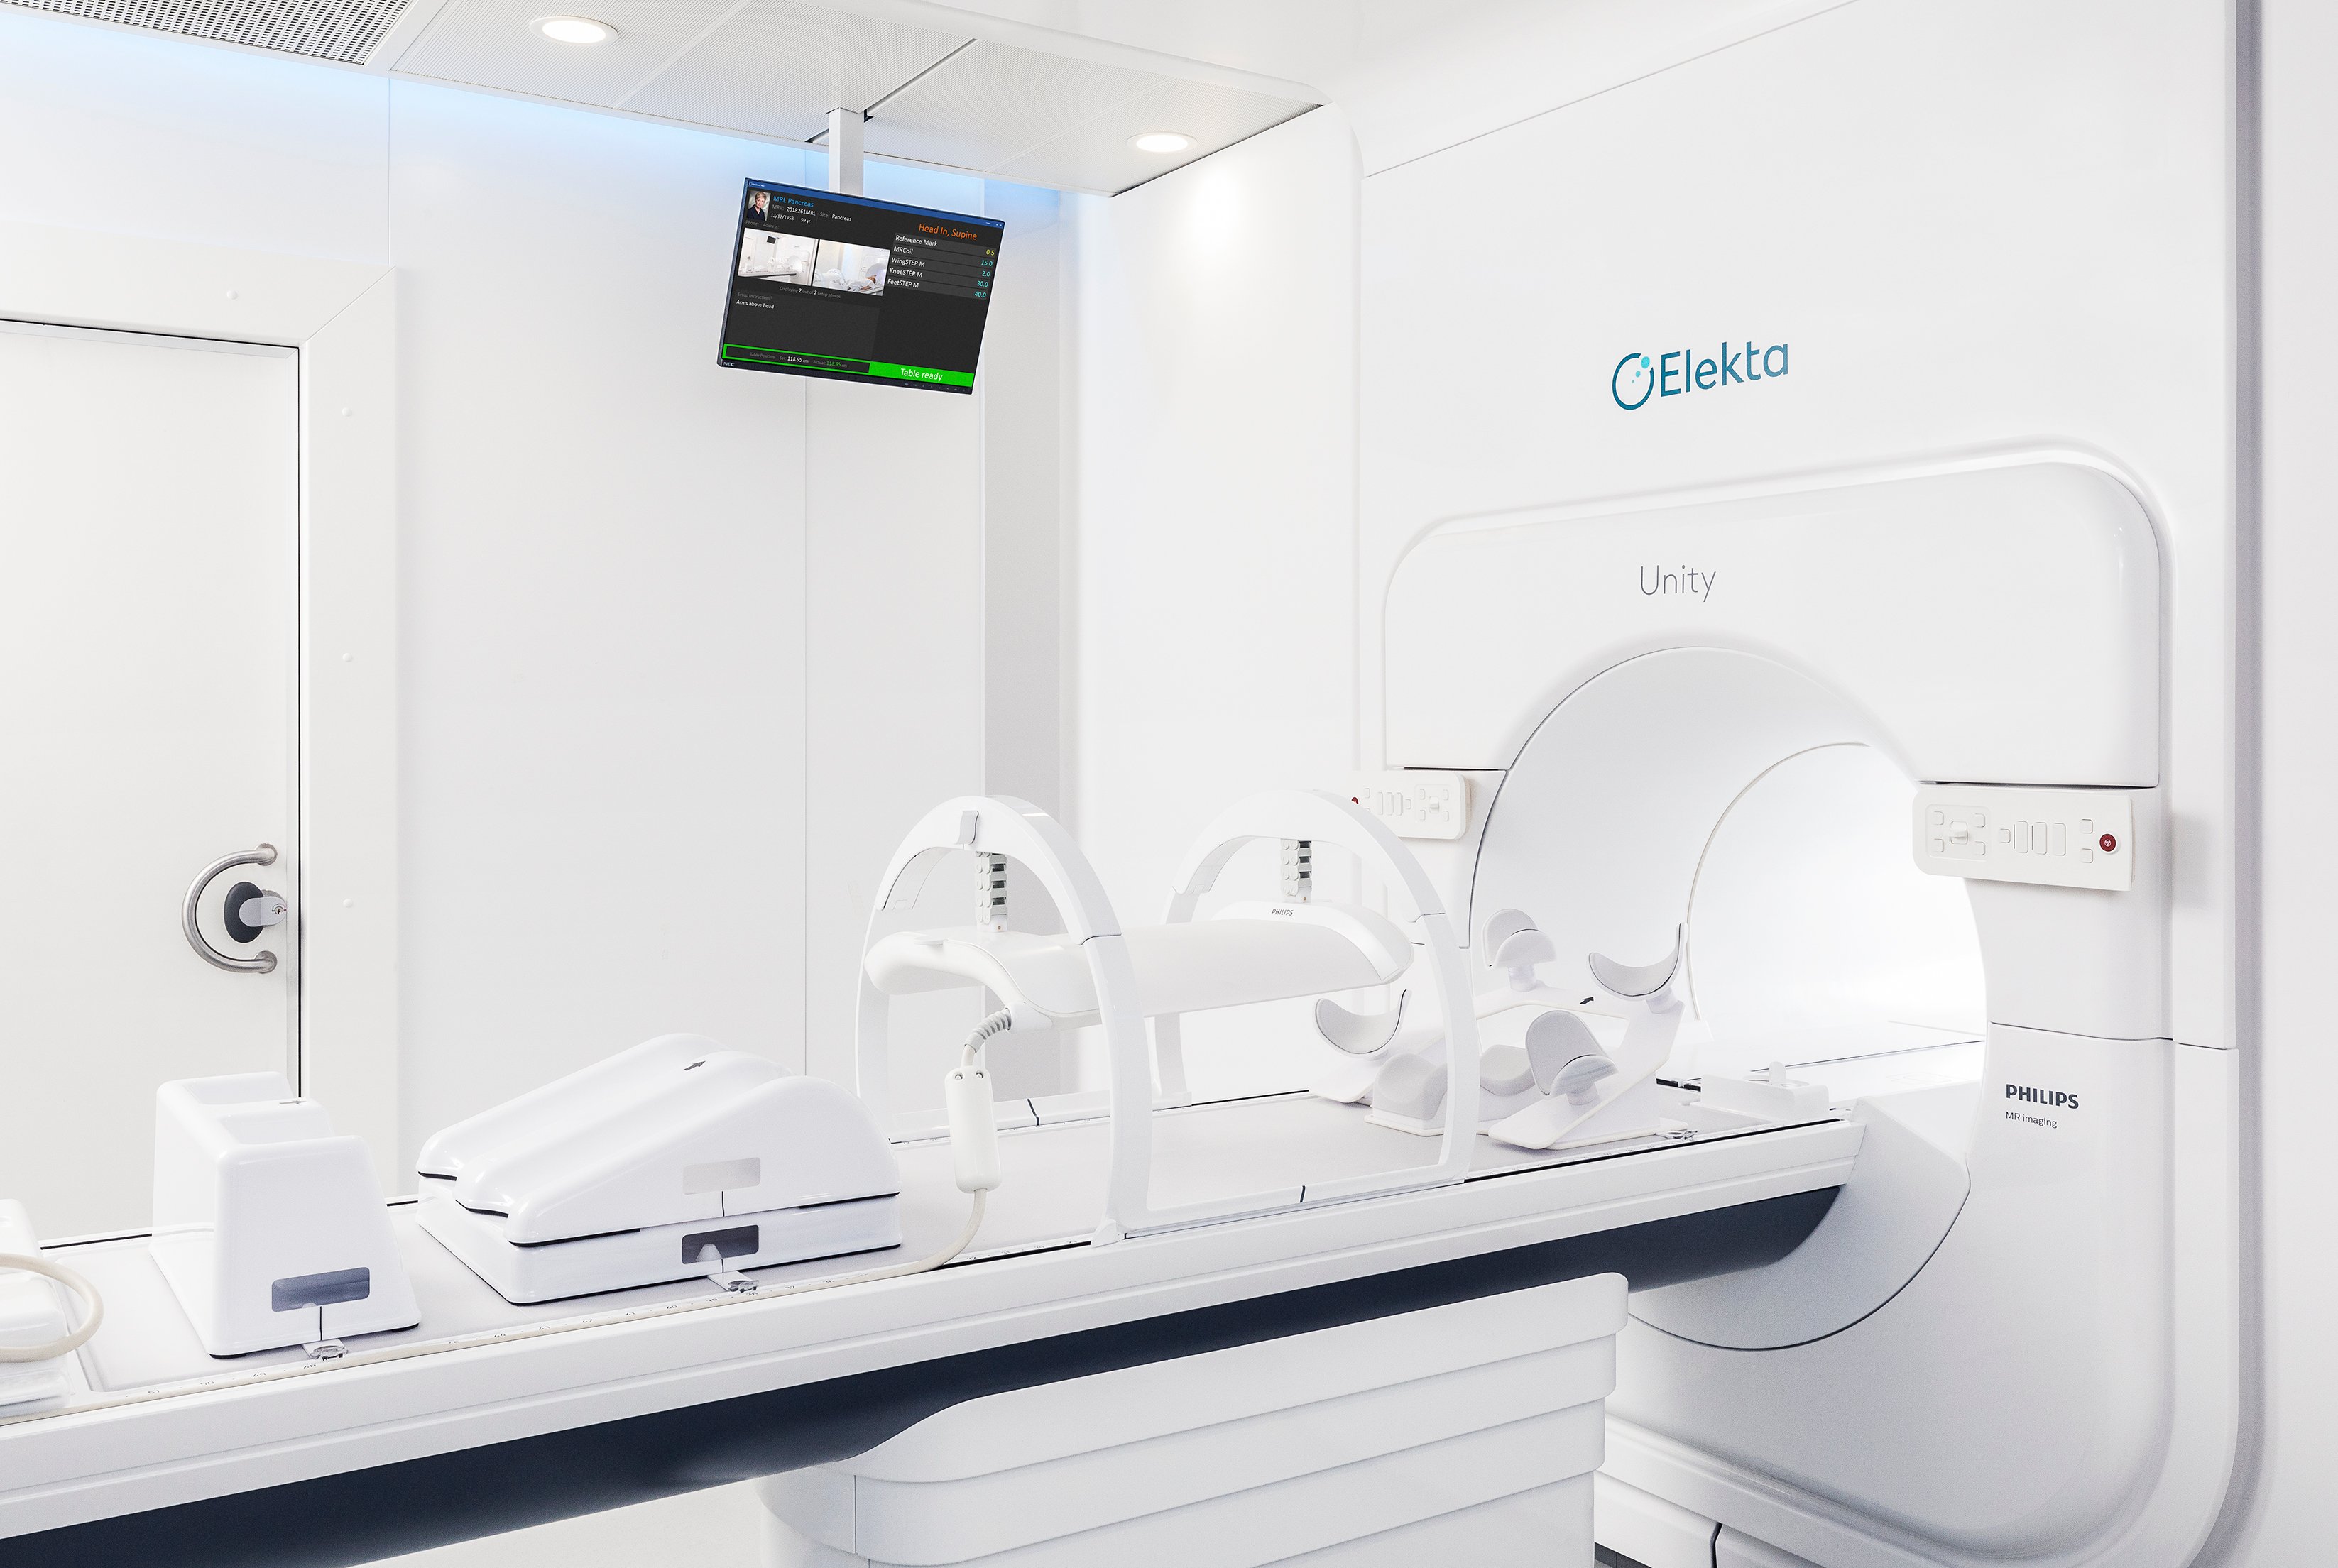 The Elekta Unity with 1.5T MRI embedded as a targeting system appeared at the annual meeting of the American Society of Radiation Oncology (ASTRO) in San Antonio, Texas. The system is being sold in Europe and could soon enter the U.S. marketplace. (Photo courtesy of Elekta)